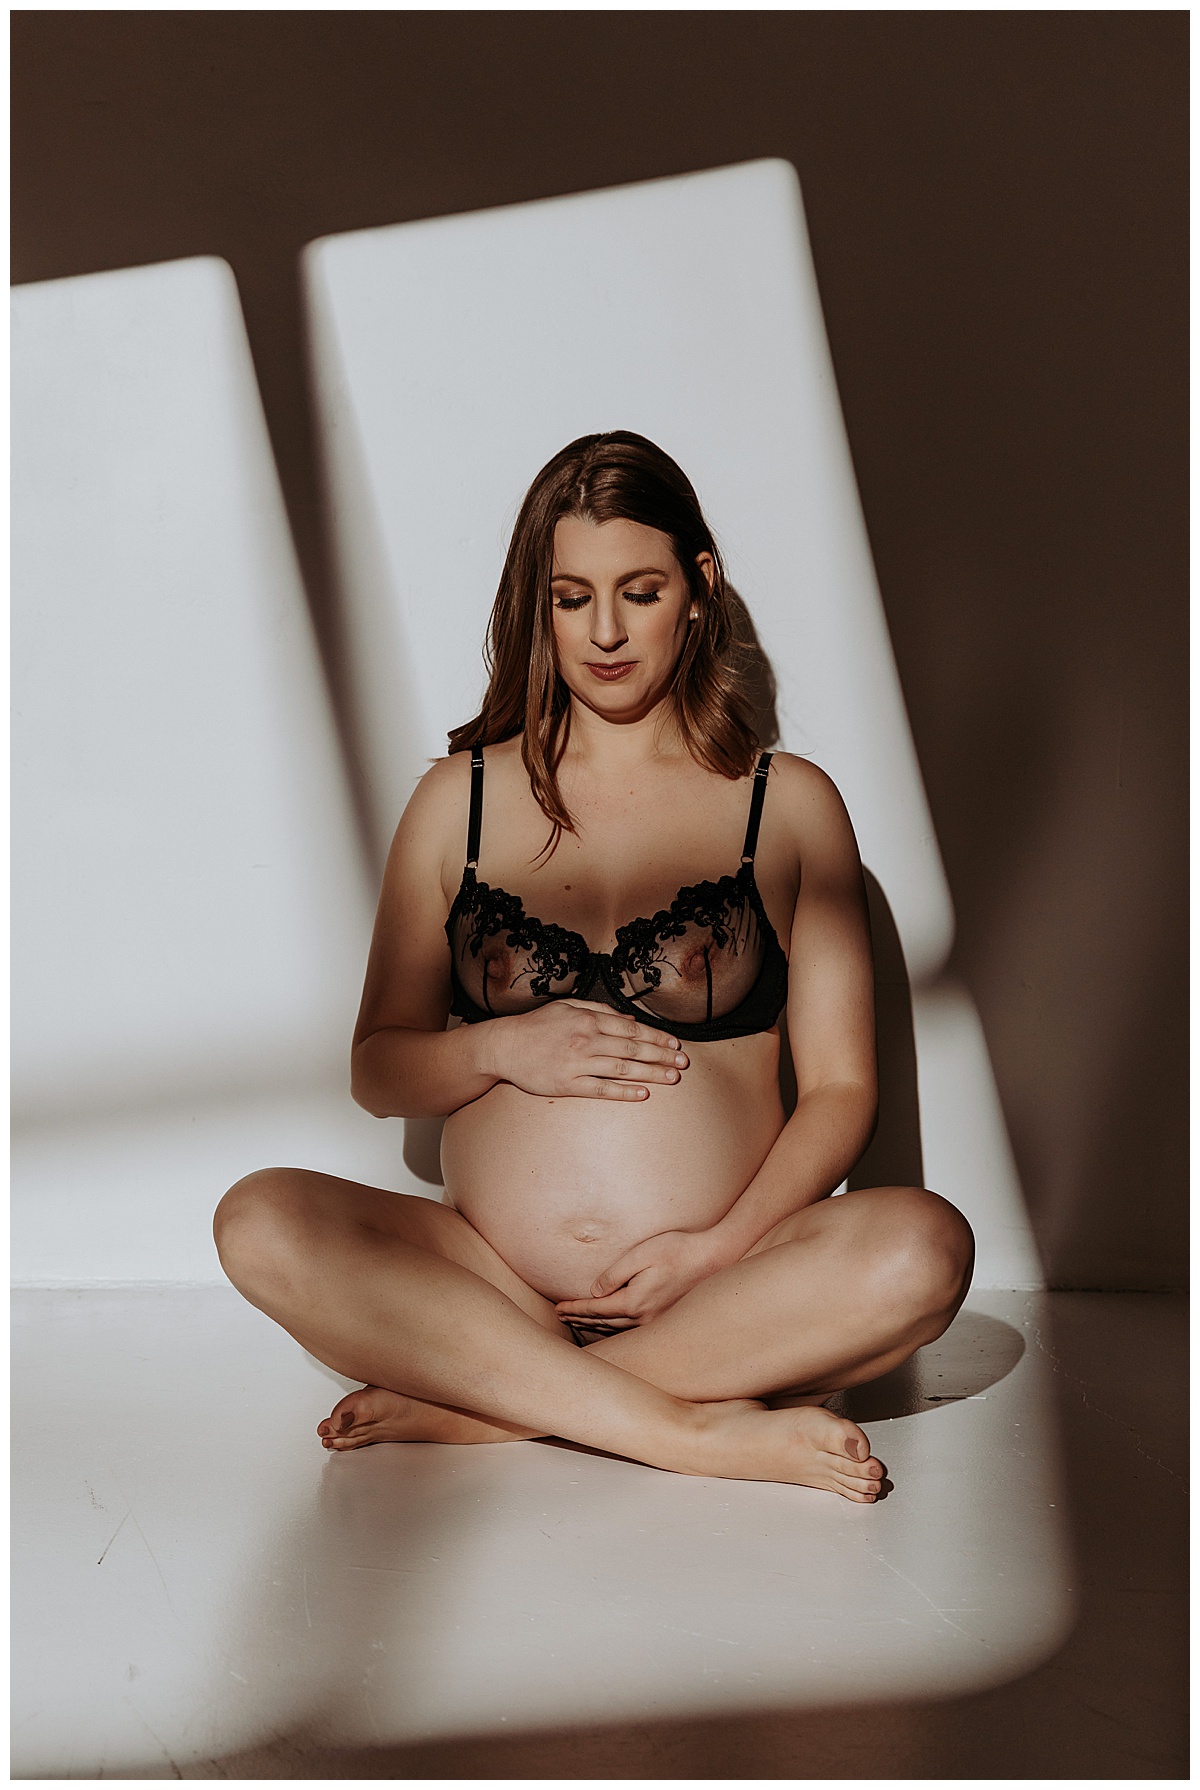 Pregnant lady looks down at pregnant belly for Maternity Boudoir session